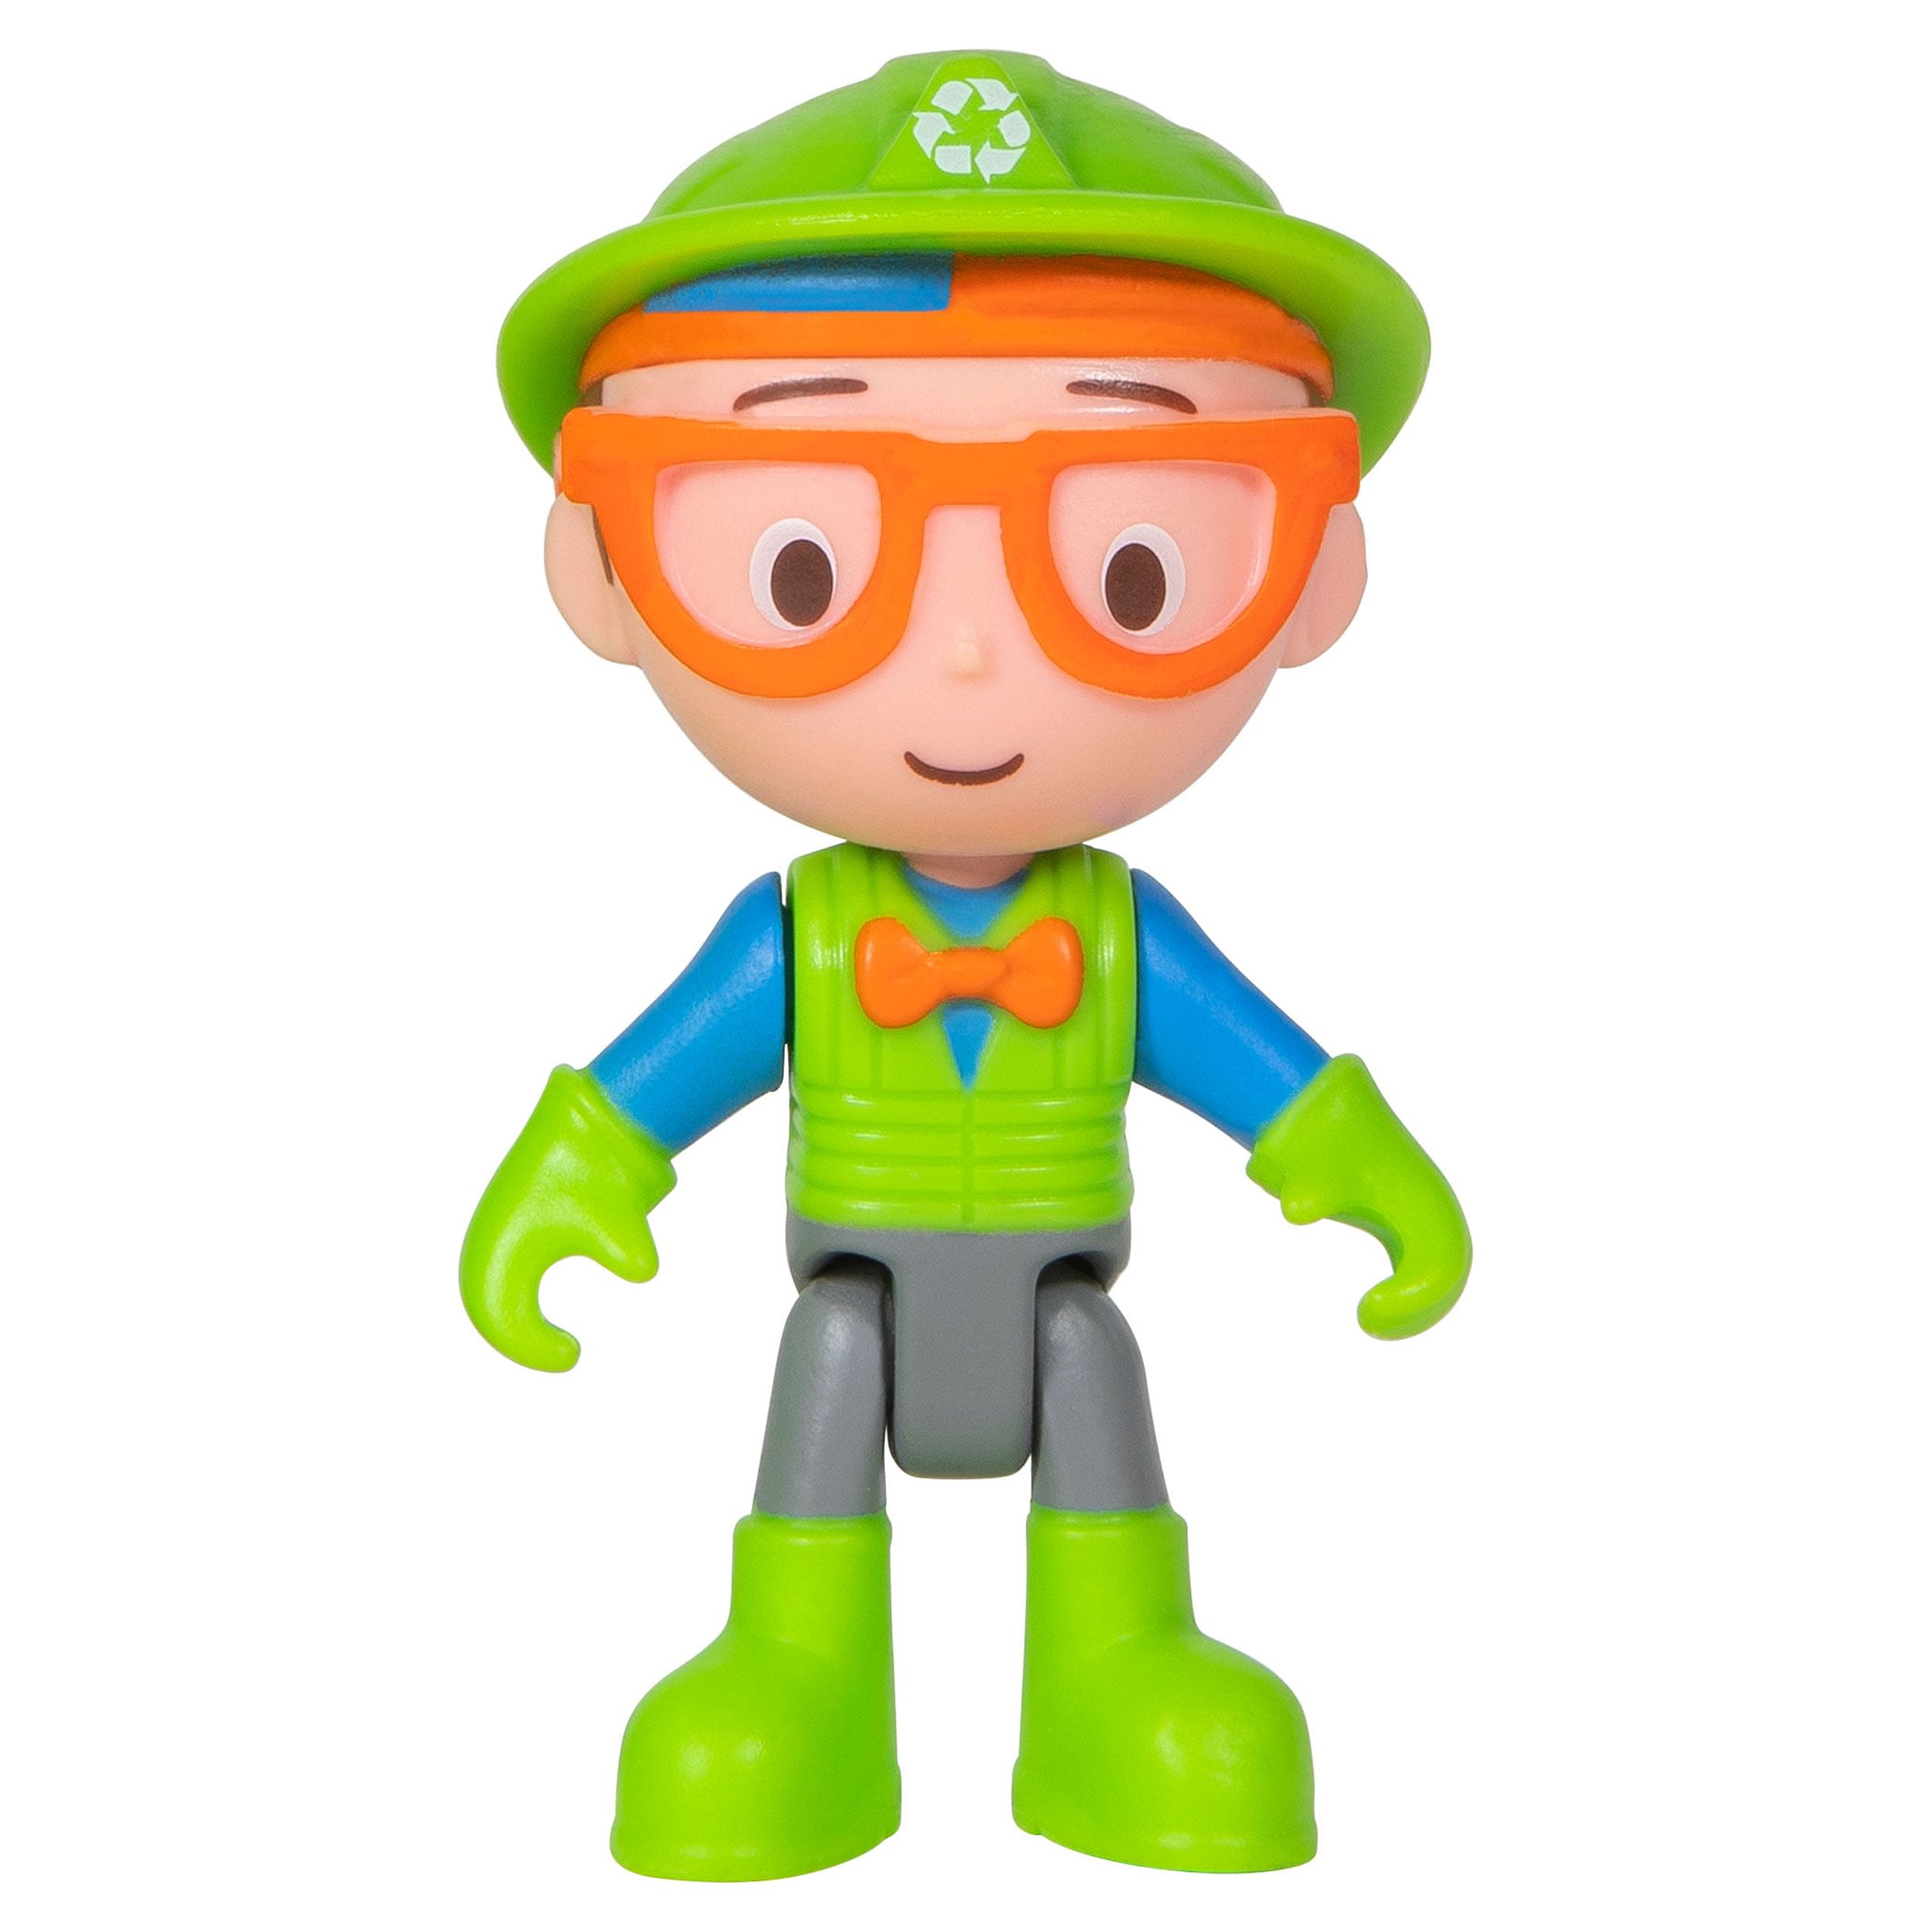 BLIPPI Recycling Truck Play Vehicle - image 10 of 18